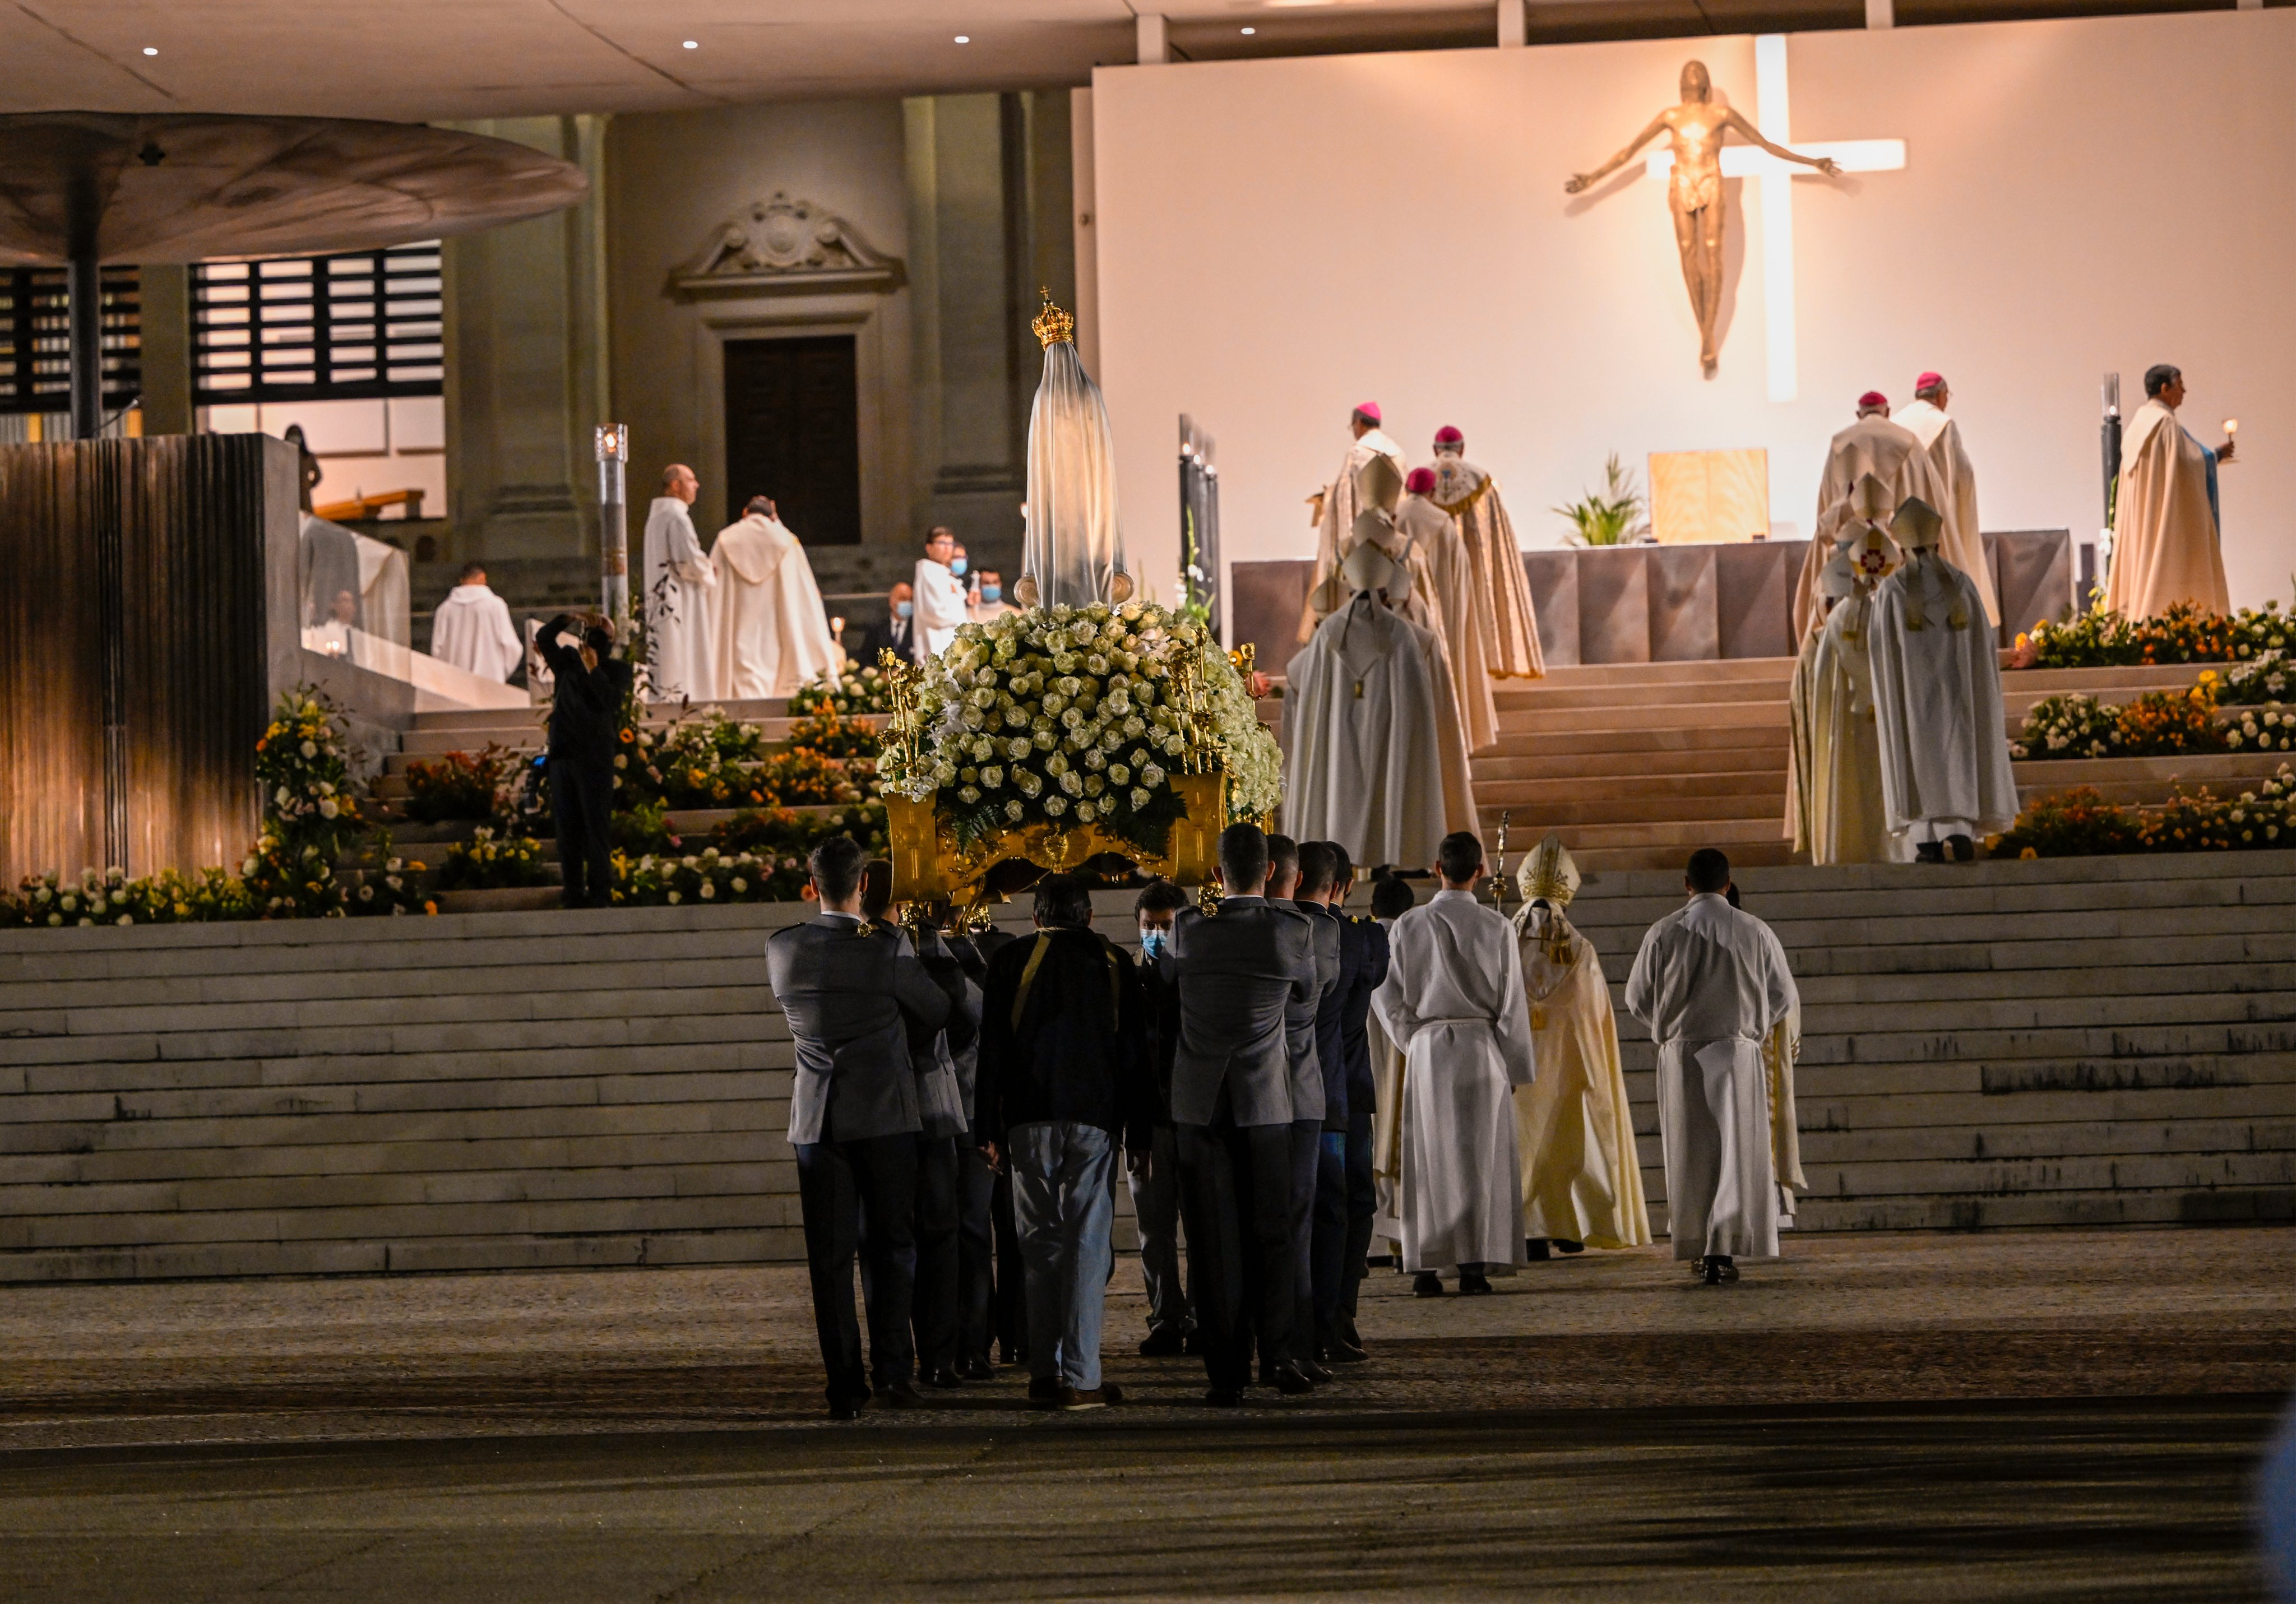 The Sanctuary Of Fatima Hosts The International Pilgrimage While Celebrating Its 105th Anniversary